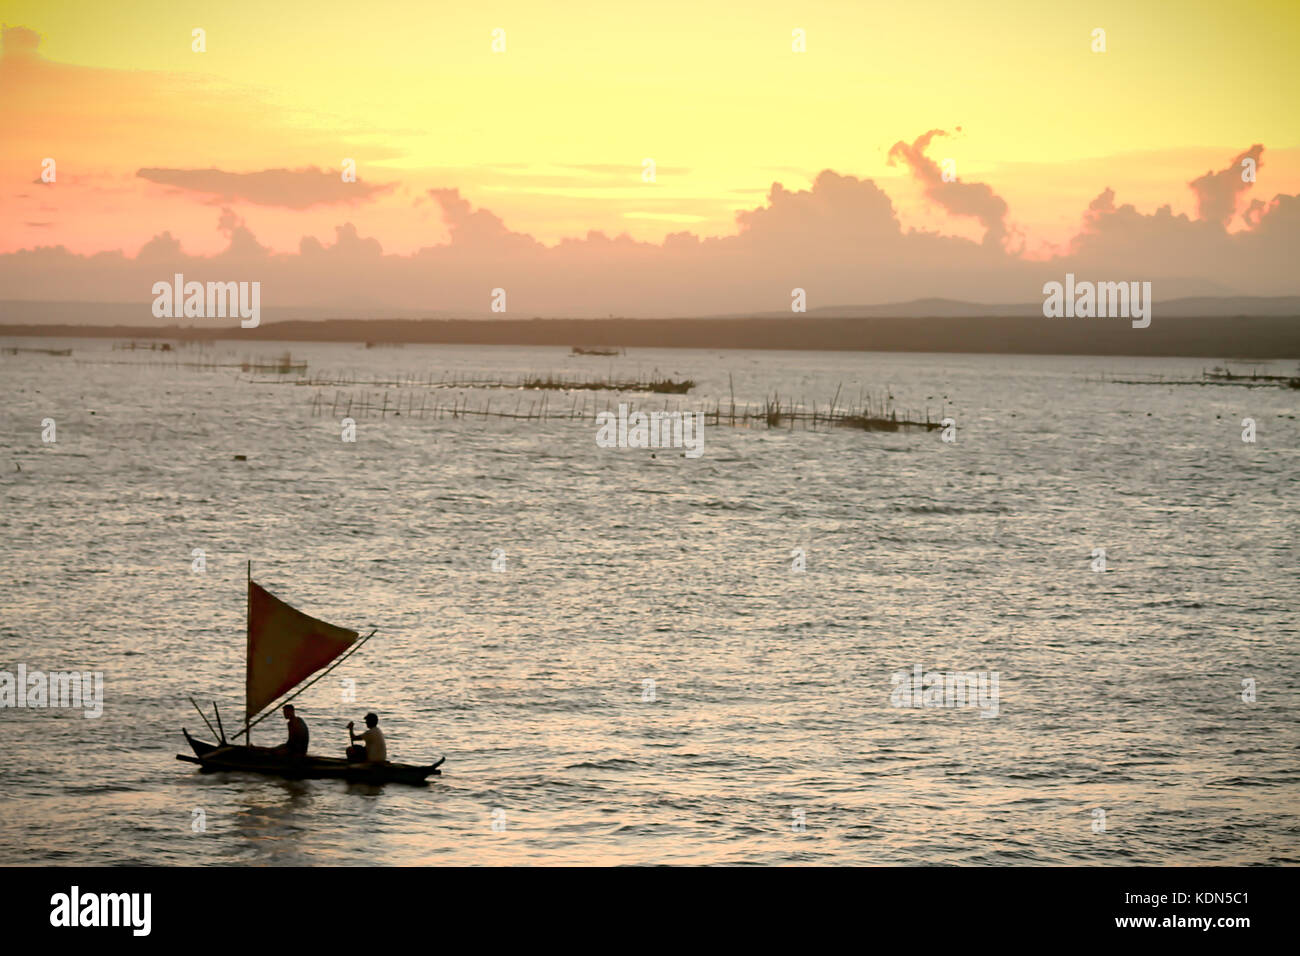 Silhouettes of fishermen in a vinta which is a traditional outrigger boat of the Philippine islands of Mindanao, candid daily local life Stock Photo